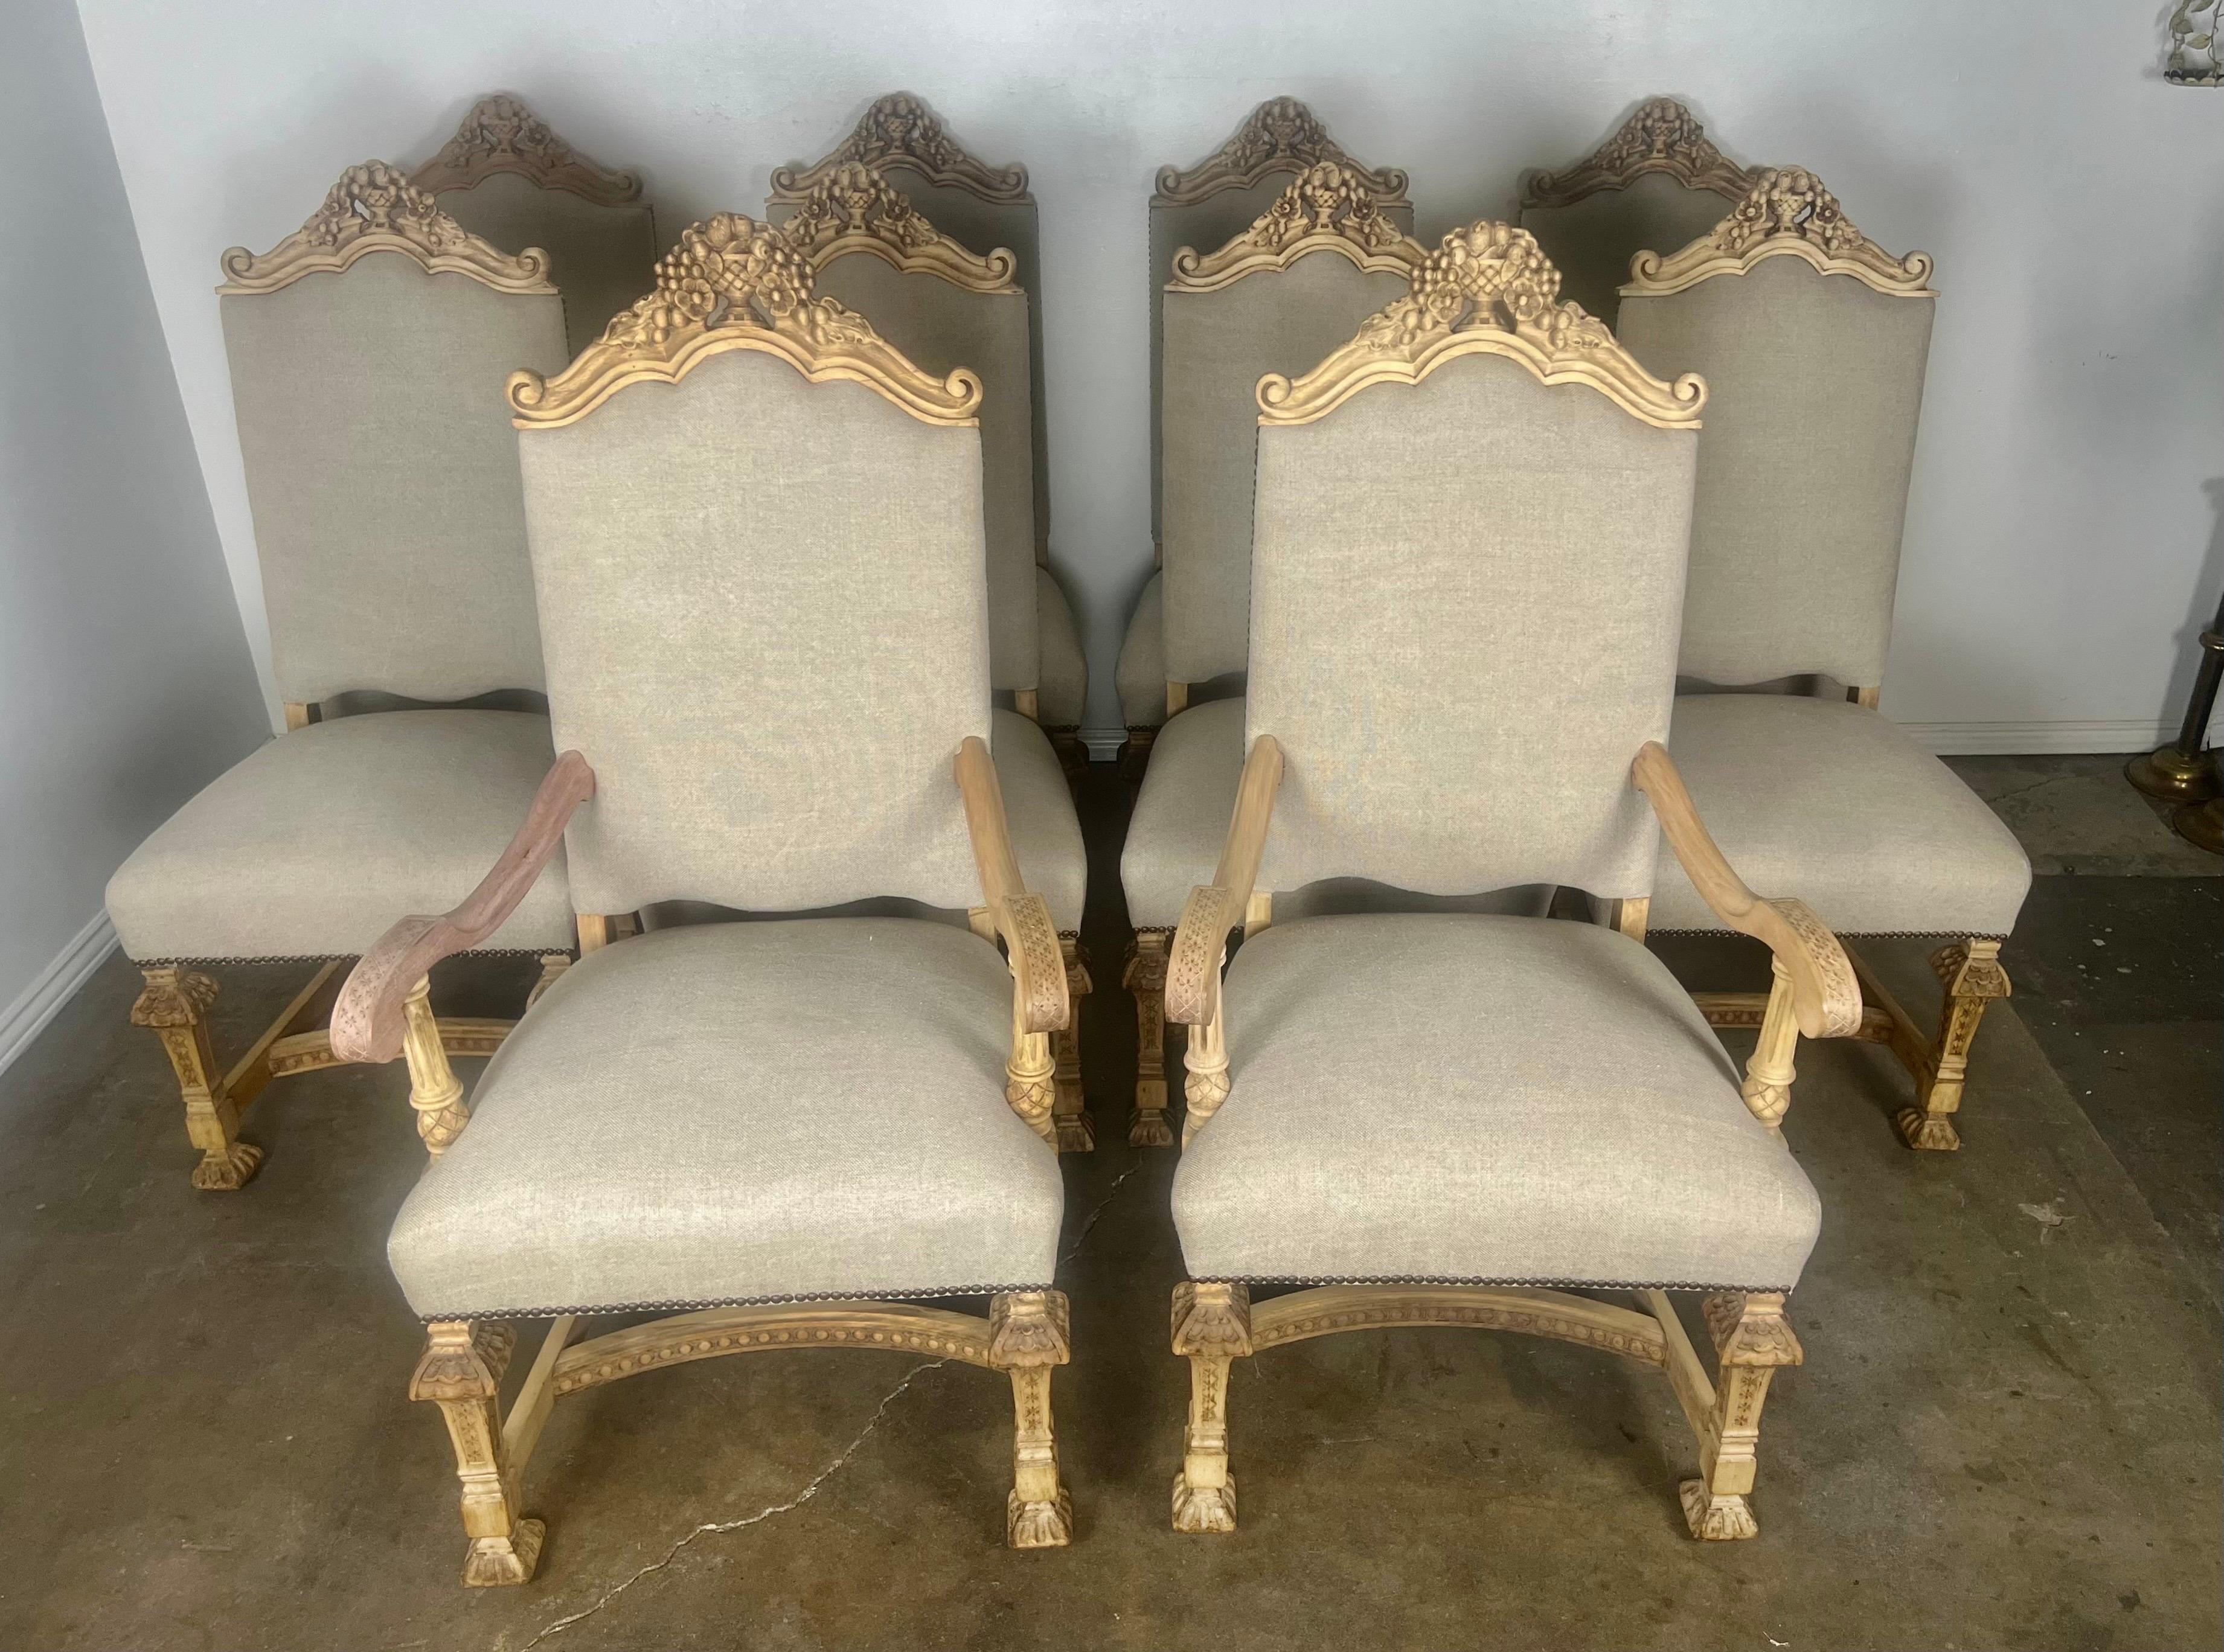 Set of Ten Italian Rococo style dining chairs with hand carved floral urn at tops of chairs.  The urns are flanked by two scrolls.  The chairs stand on four straight legs with intricate detailing throughout.  Newly reupholstered in a washed Belgium